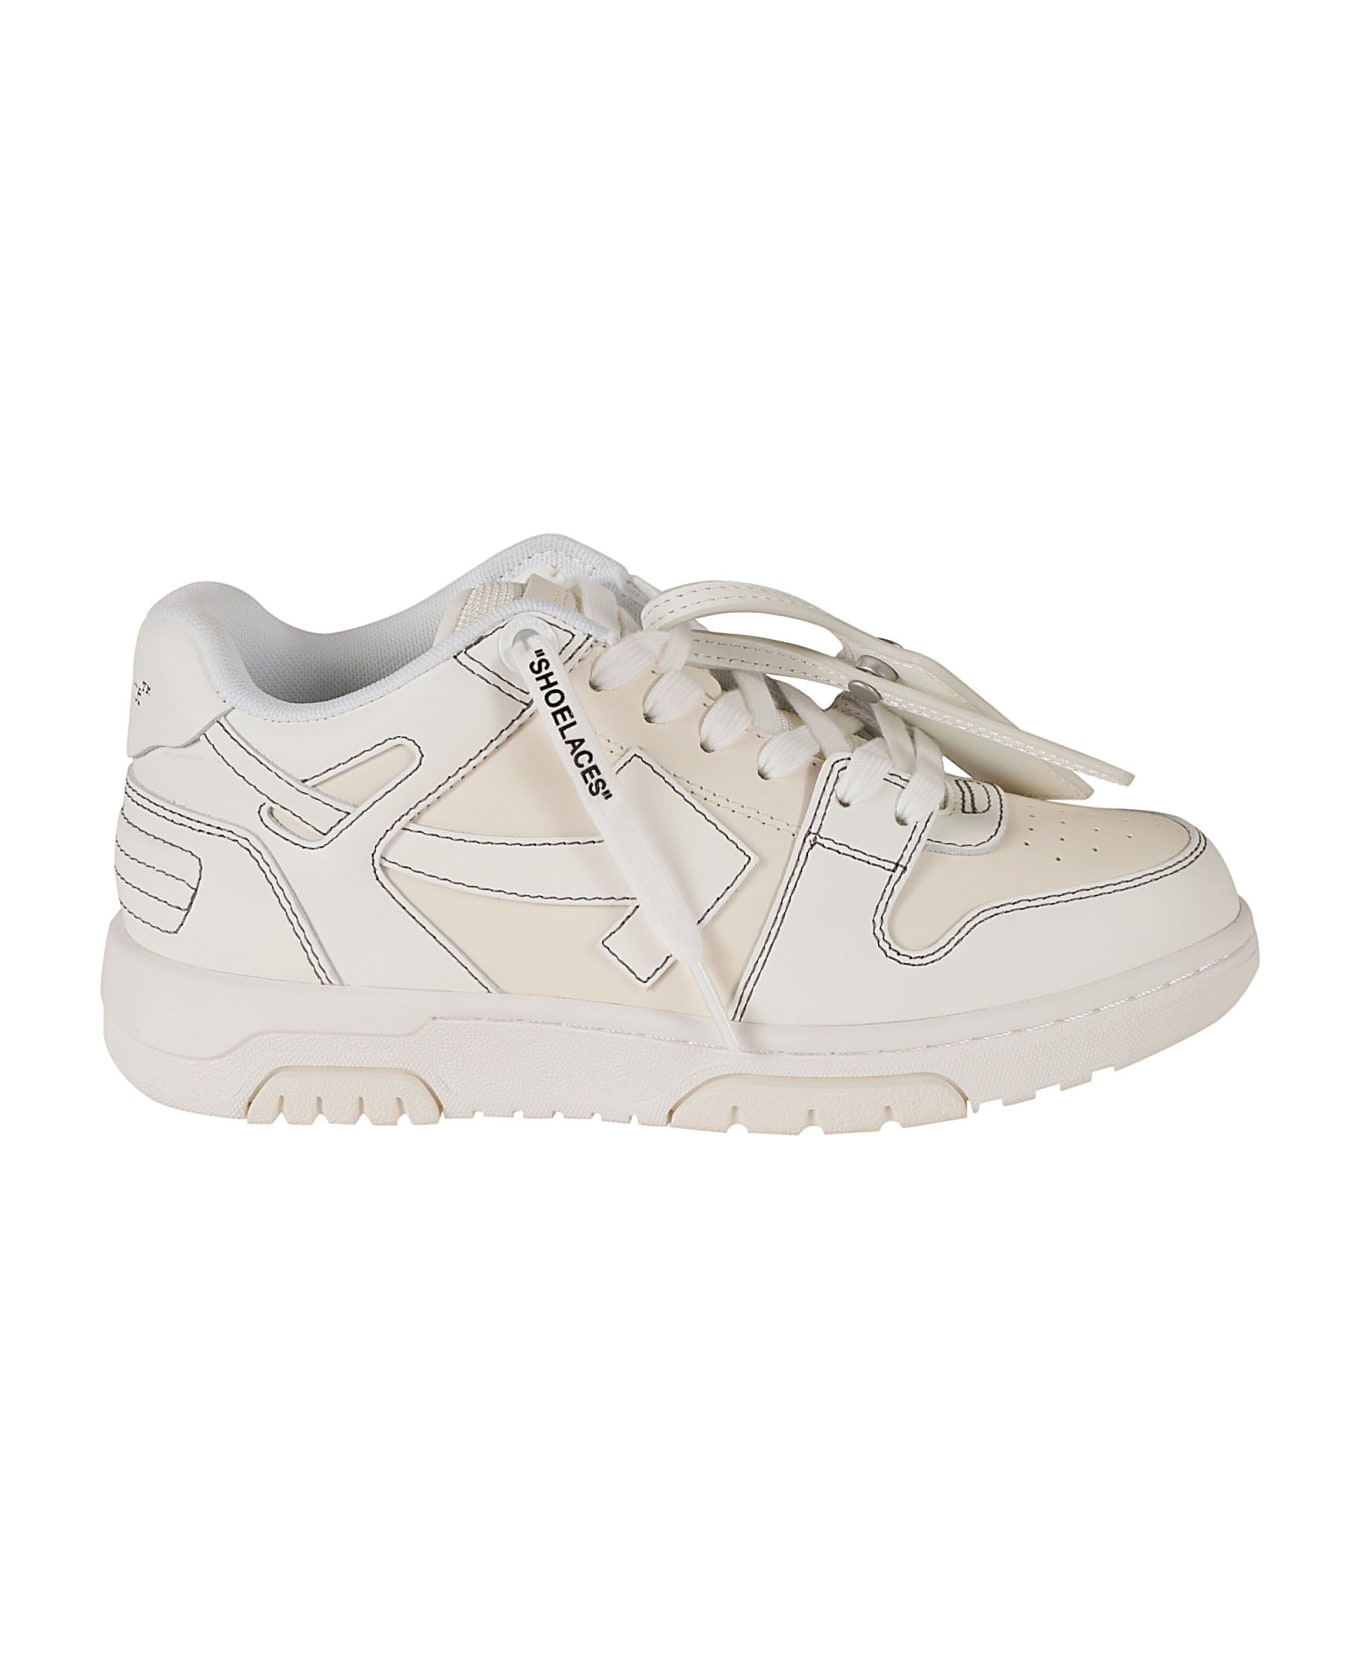 Off-White Out Of Office Sneakers - Cream/White スニーカー